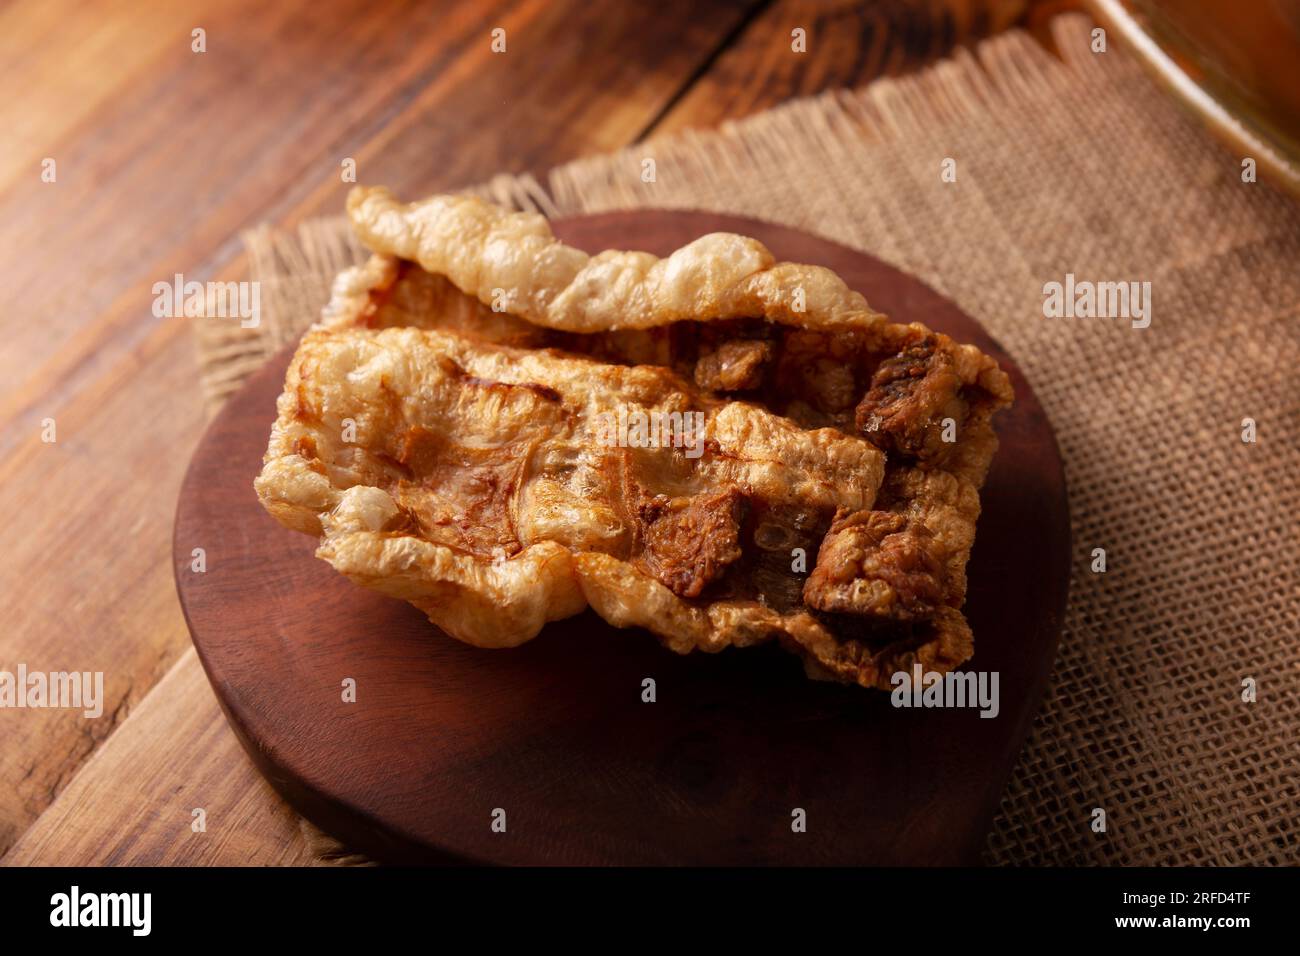 Chicharron. Crispy Fried pork rind, are pieces of aired and fried pork skin, traditional Mexican ingredient or snack served on wooden cutting board Stock Photo